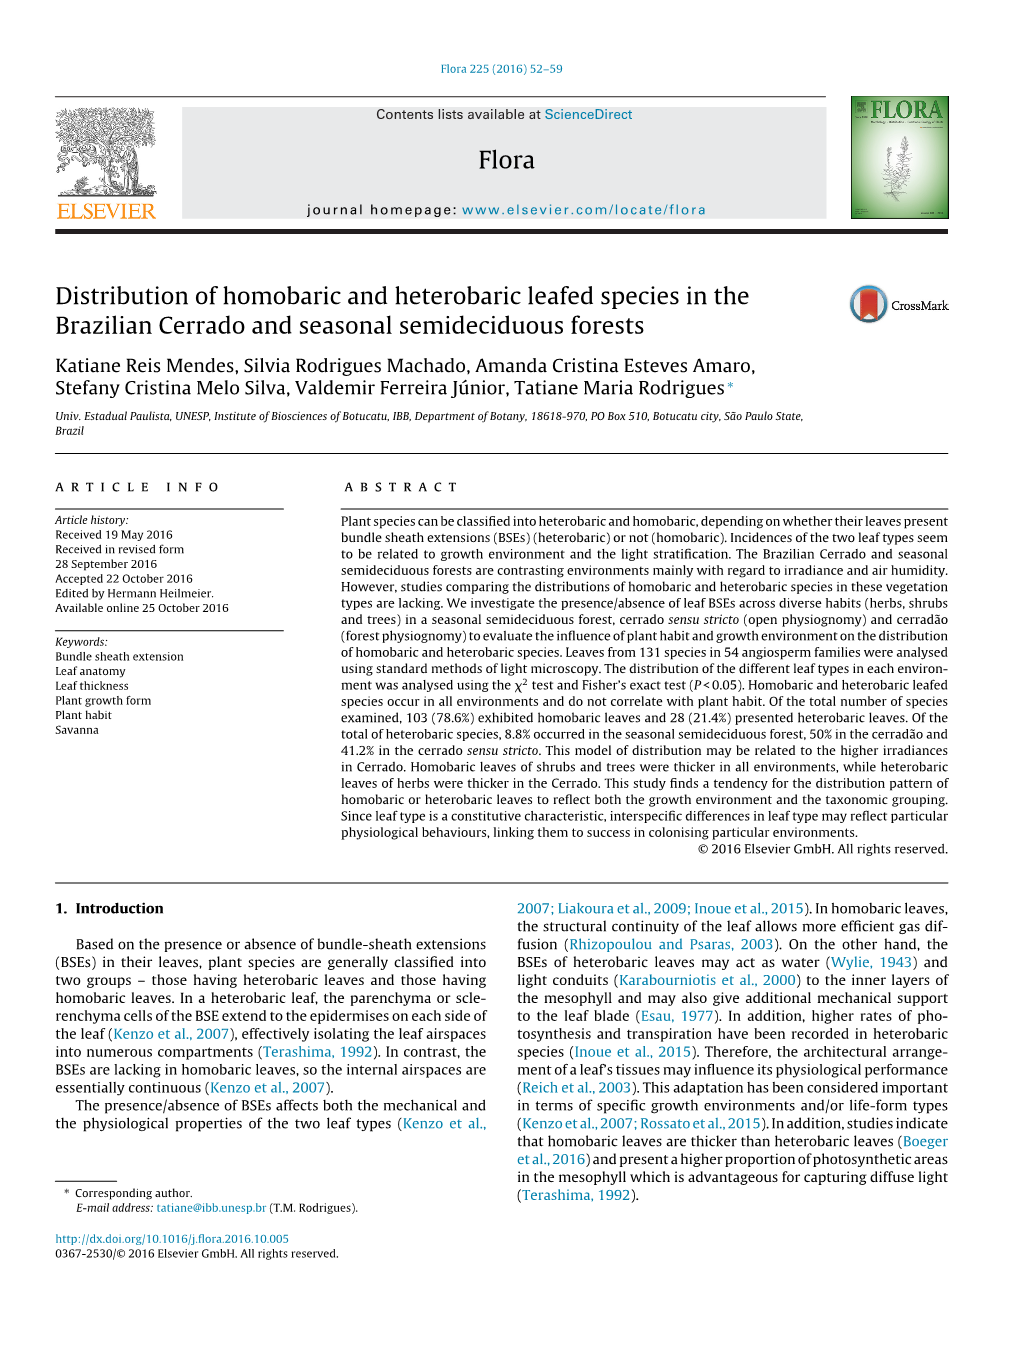 Distribution of Homobaric and Heterobaric Leafed Species in The